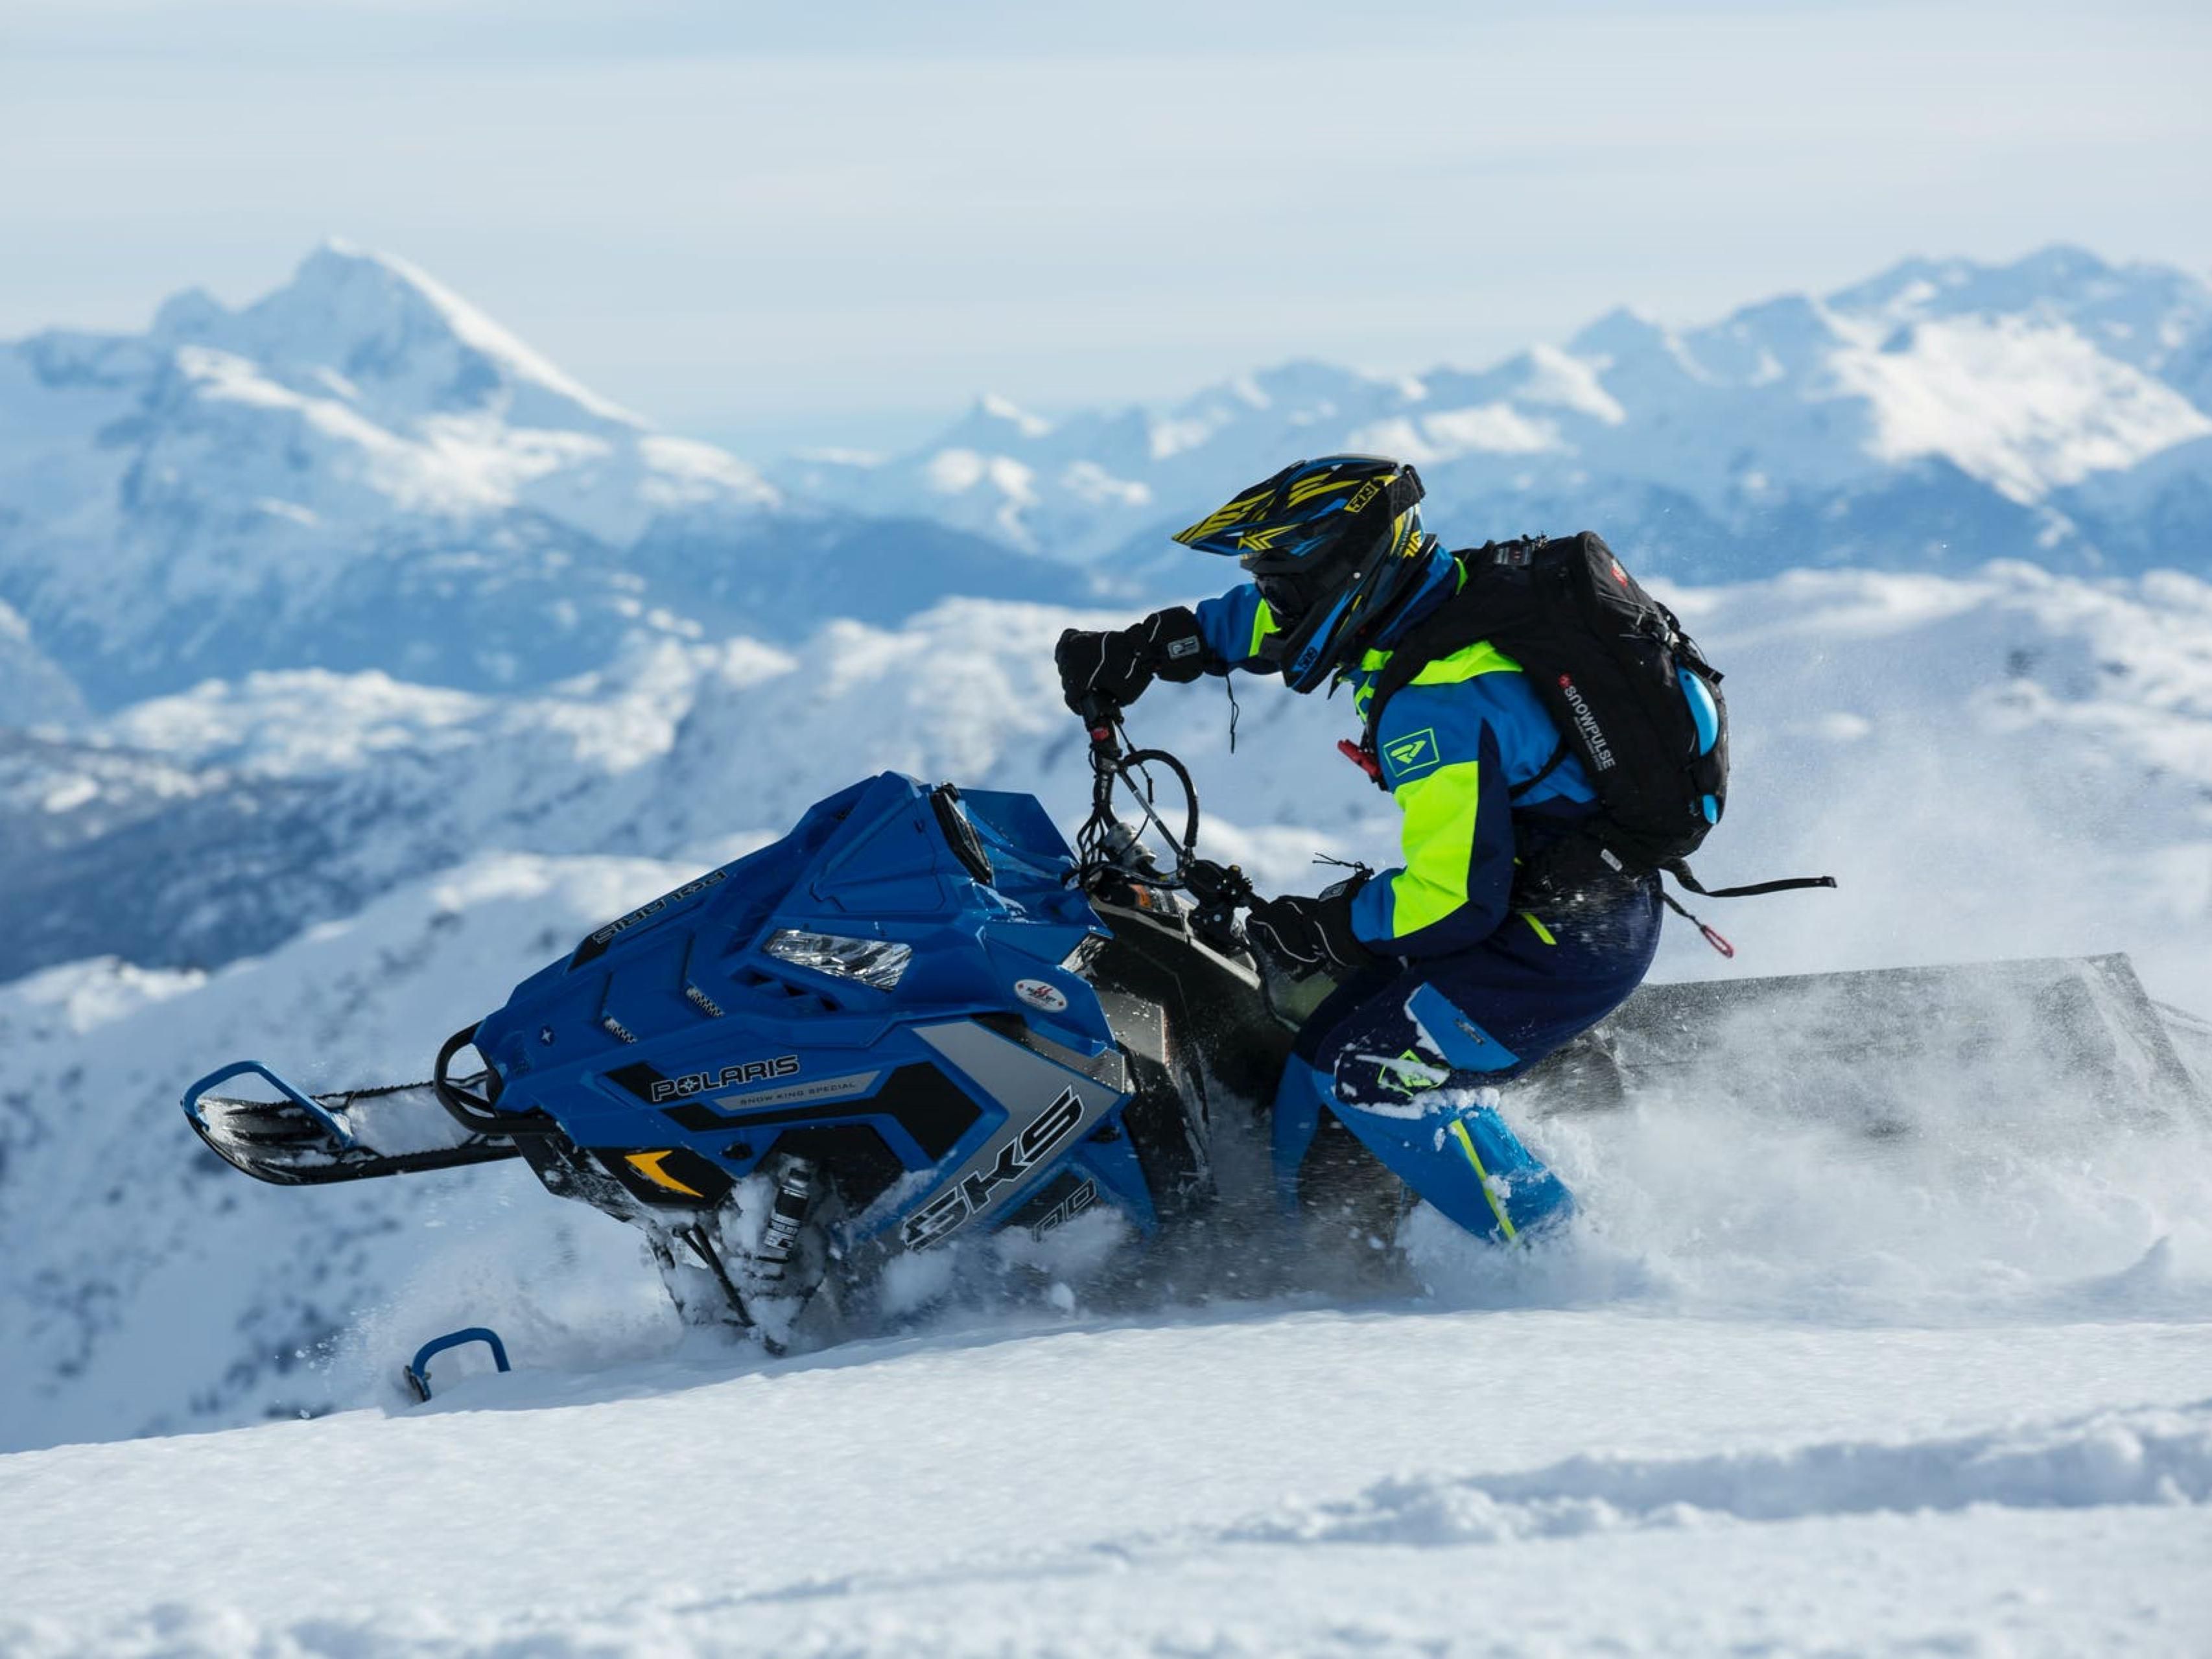 Come to the snowmobiling hub!